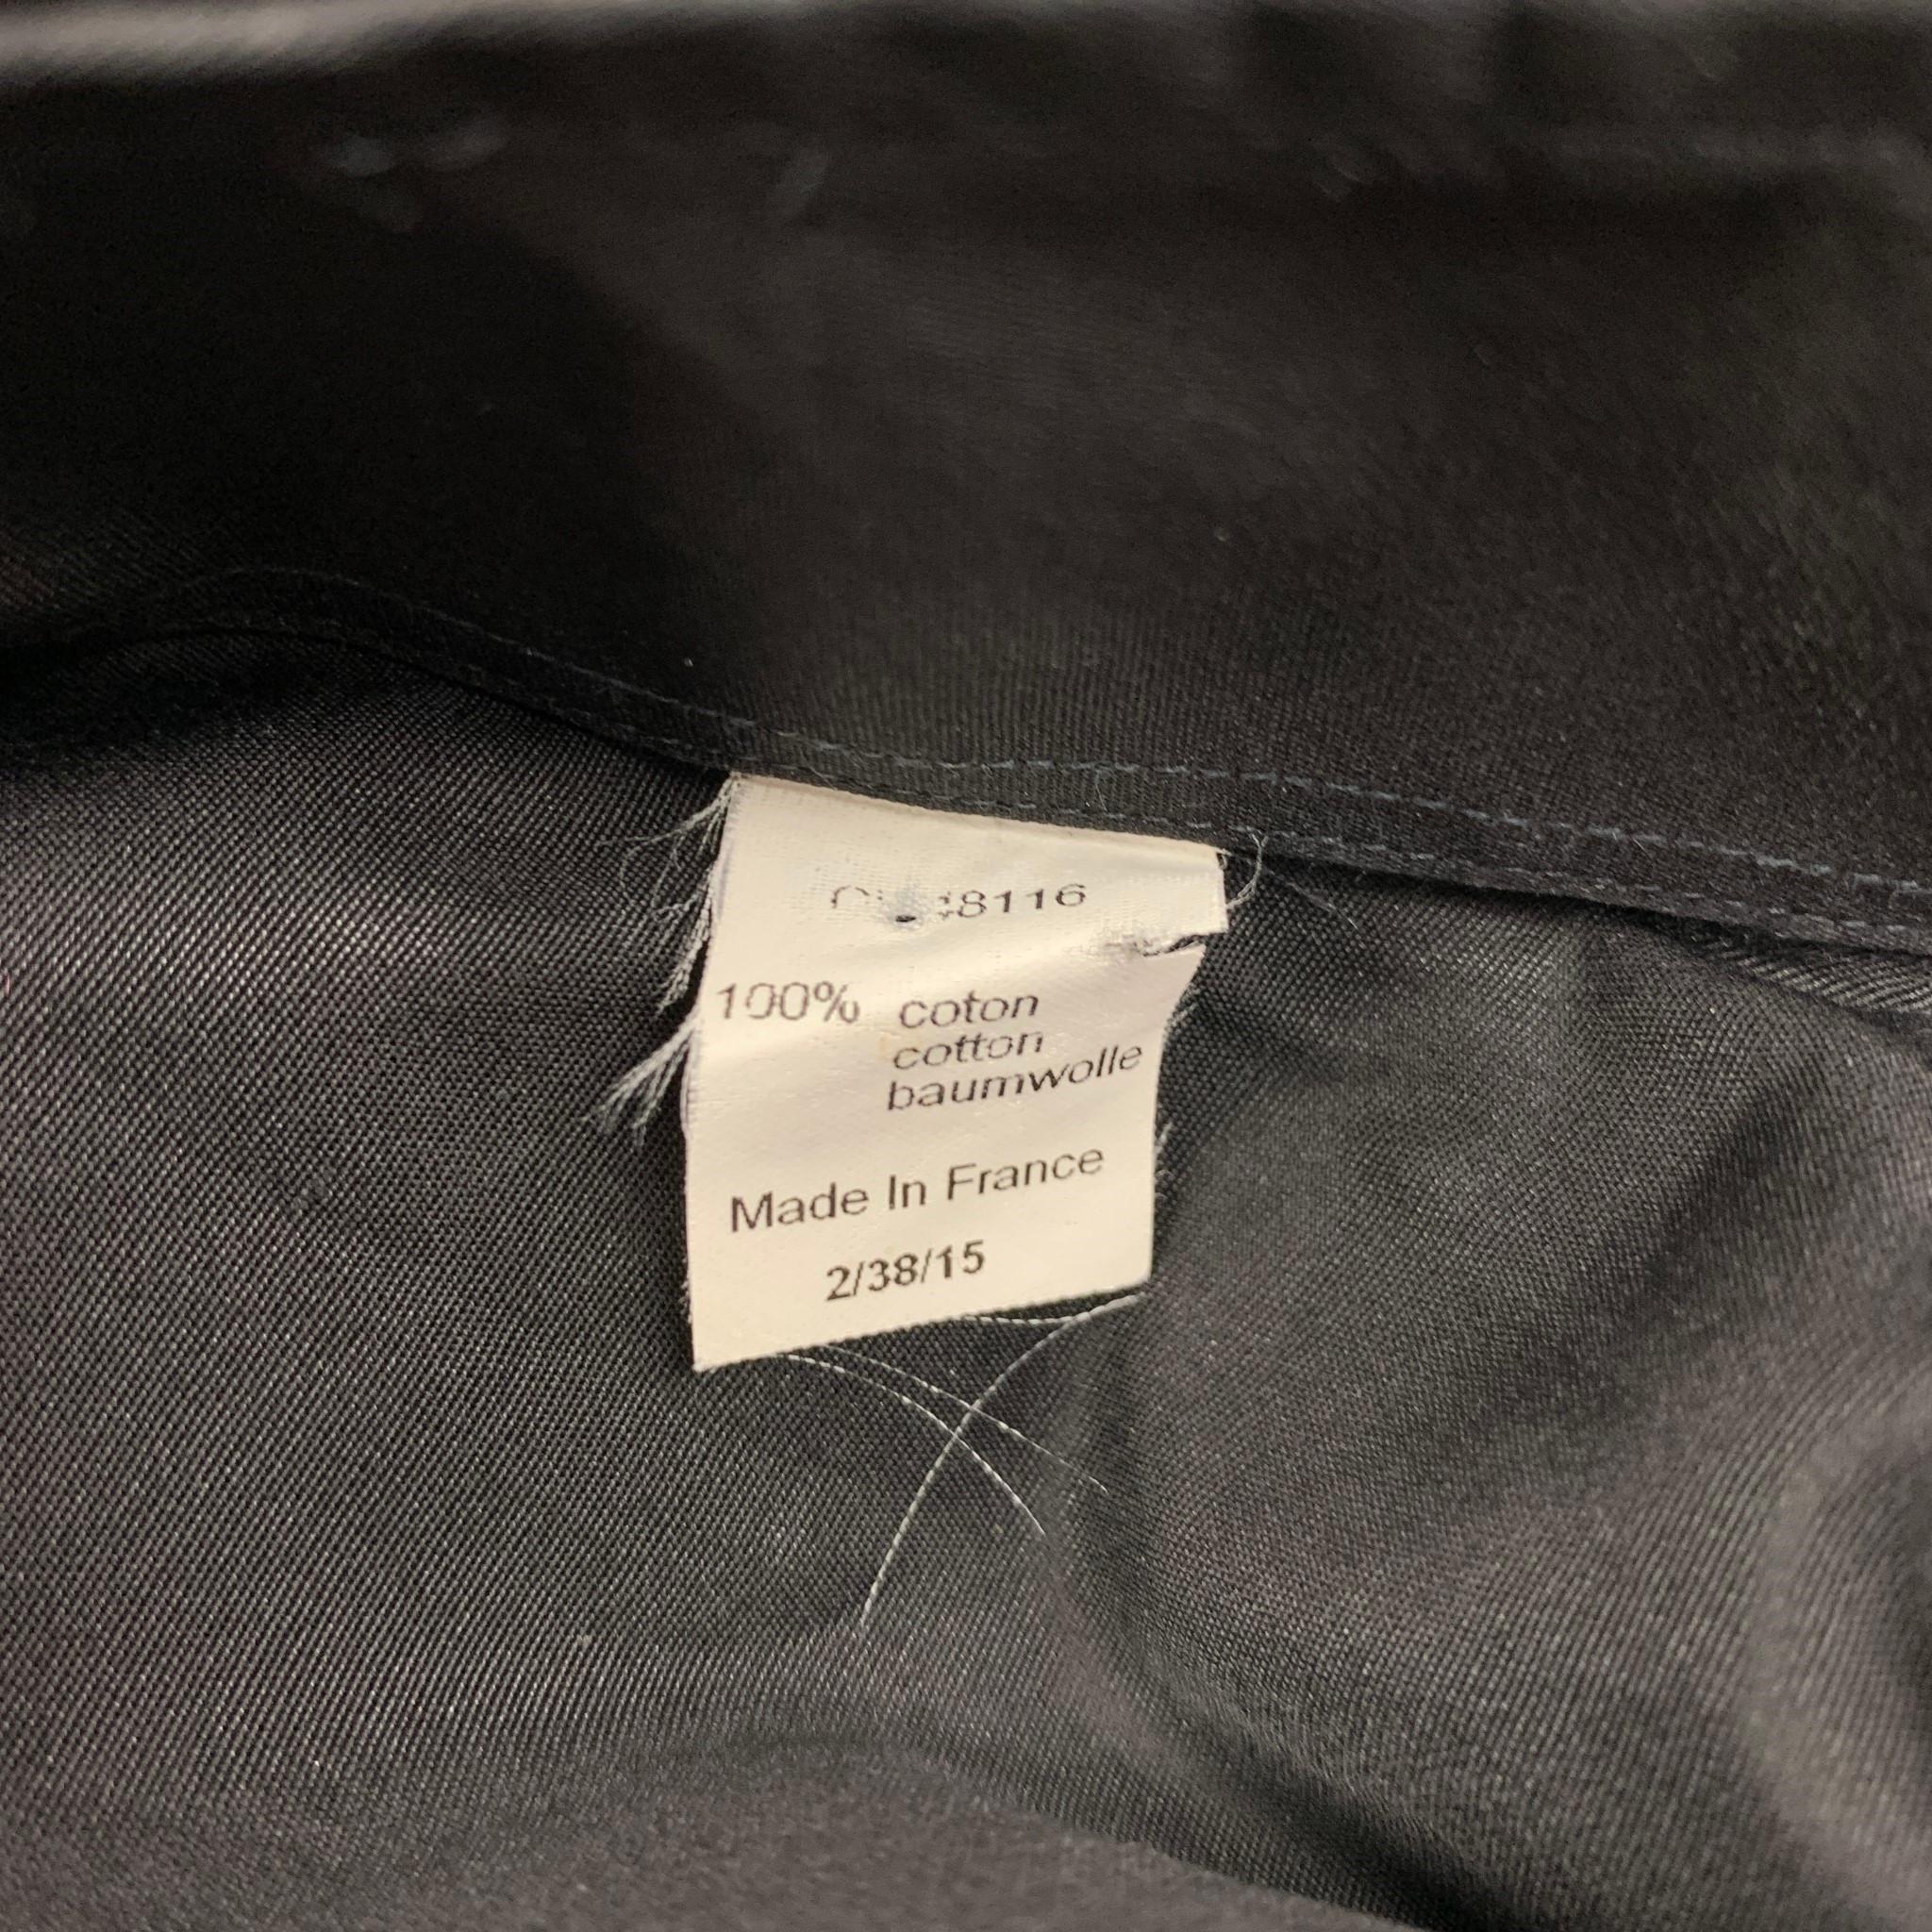 french placket meaning